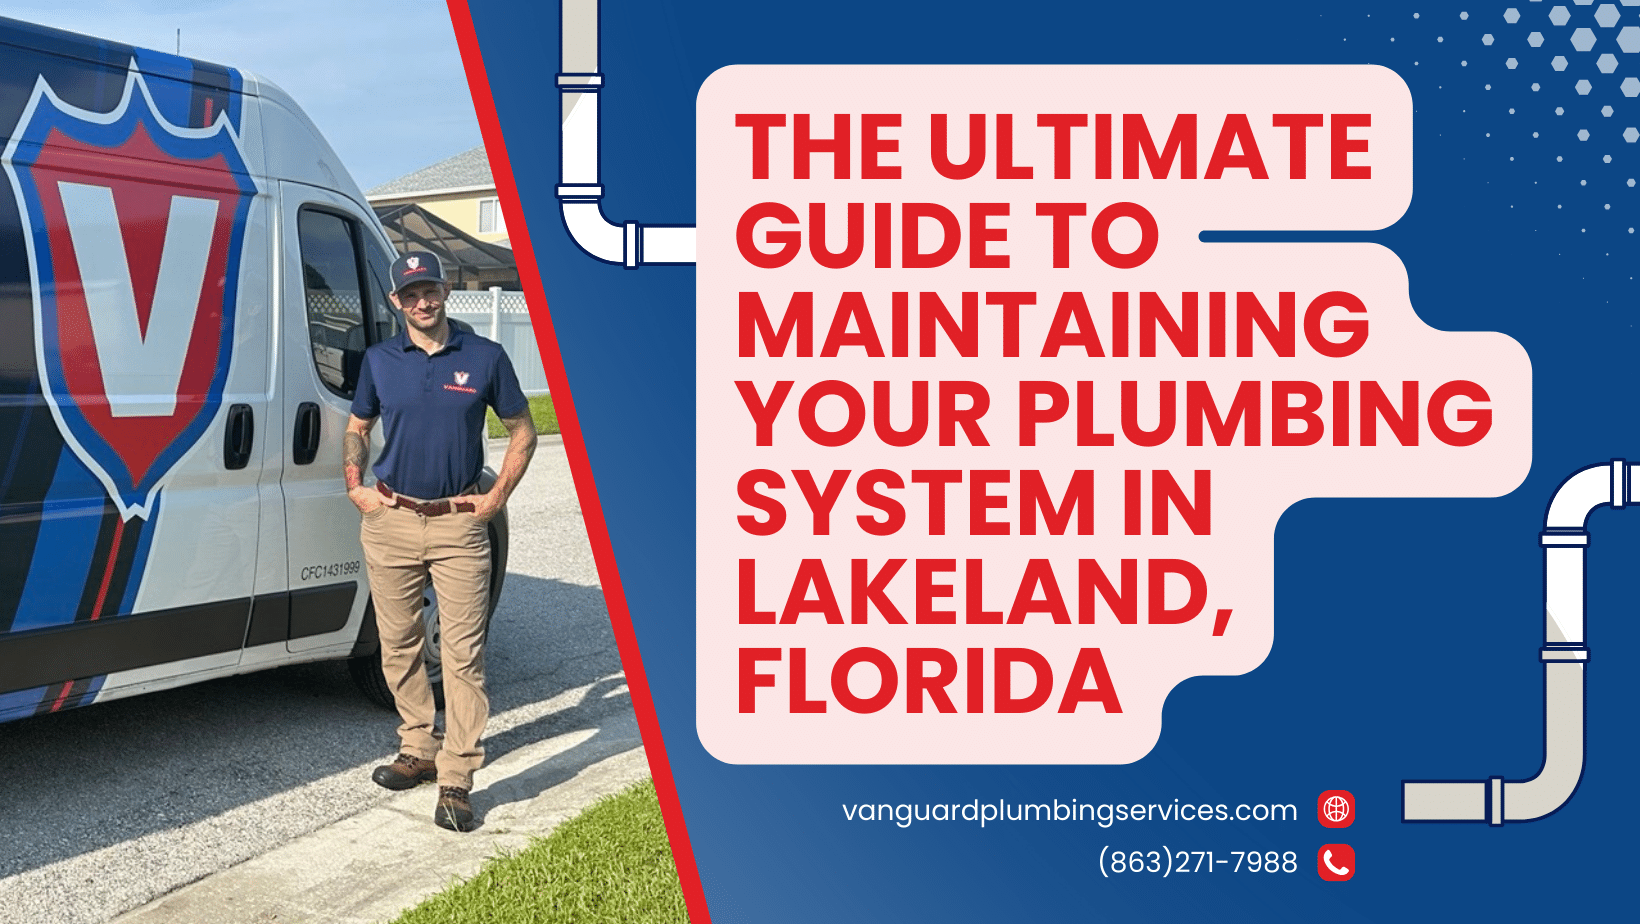 The Ultimate Guide to Maintaining Your Plumbing System in Lakeland Florida